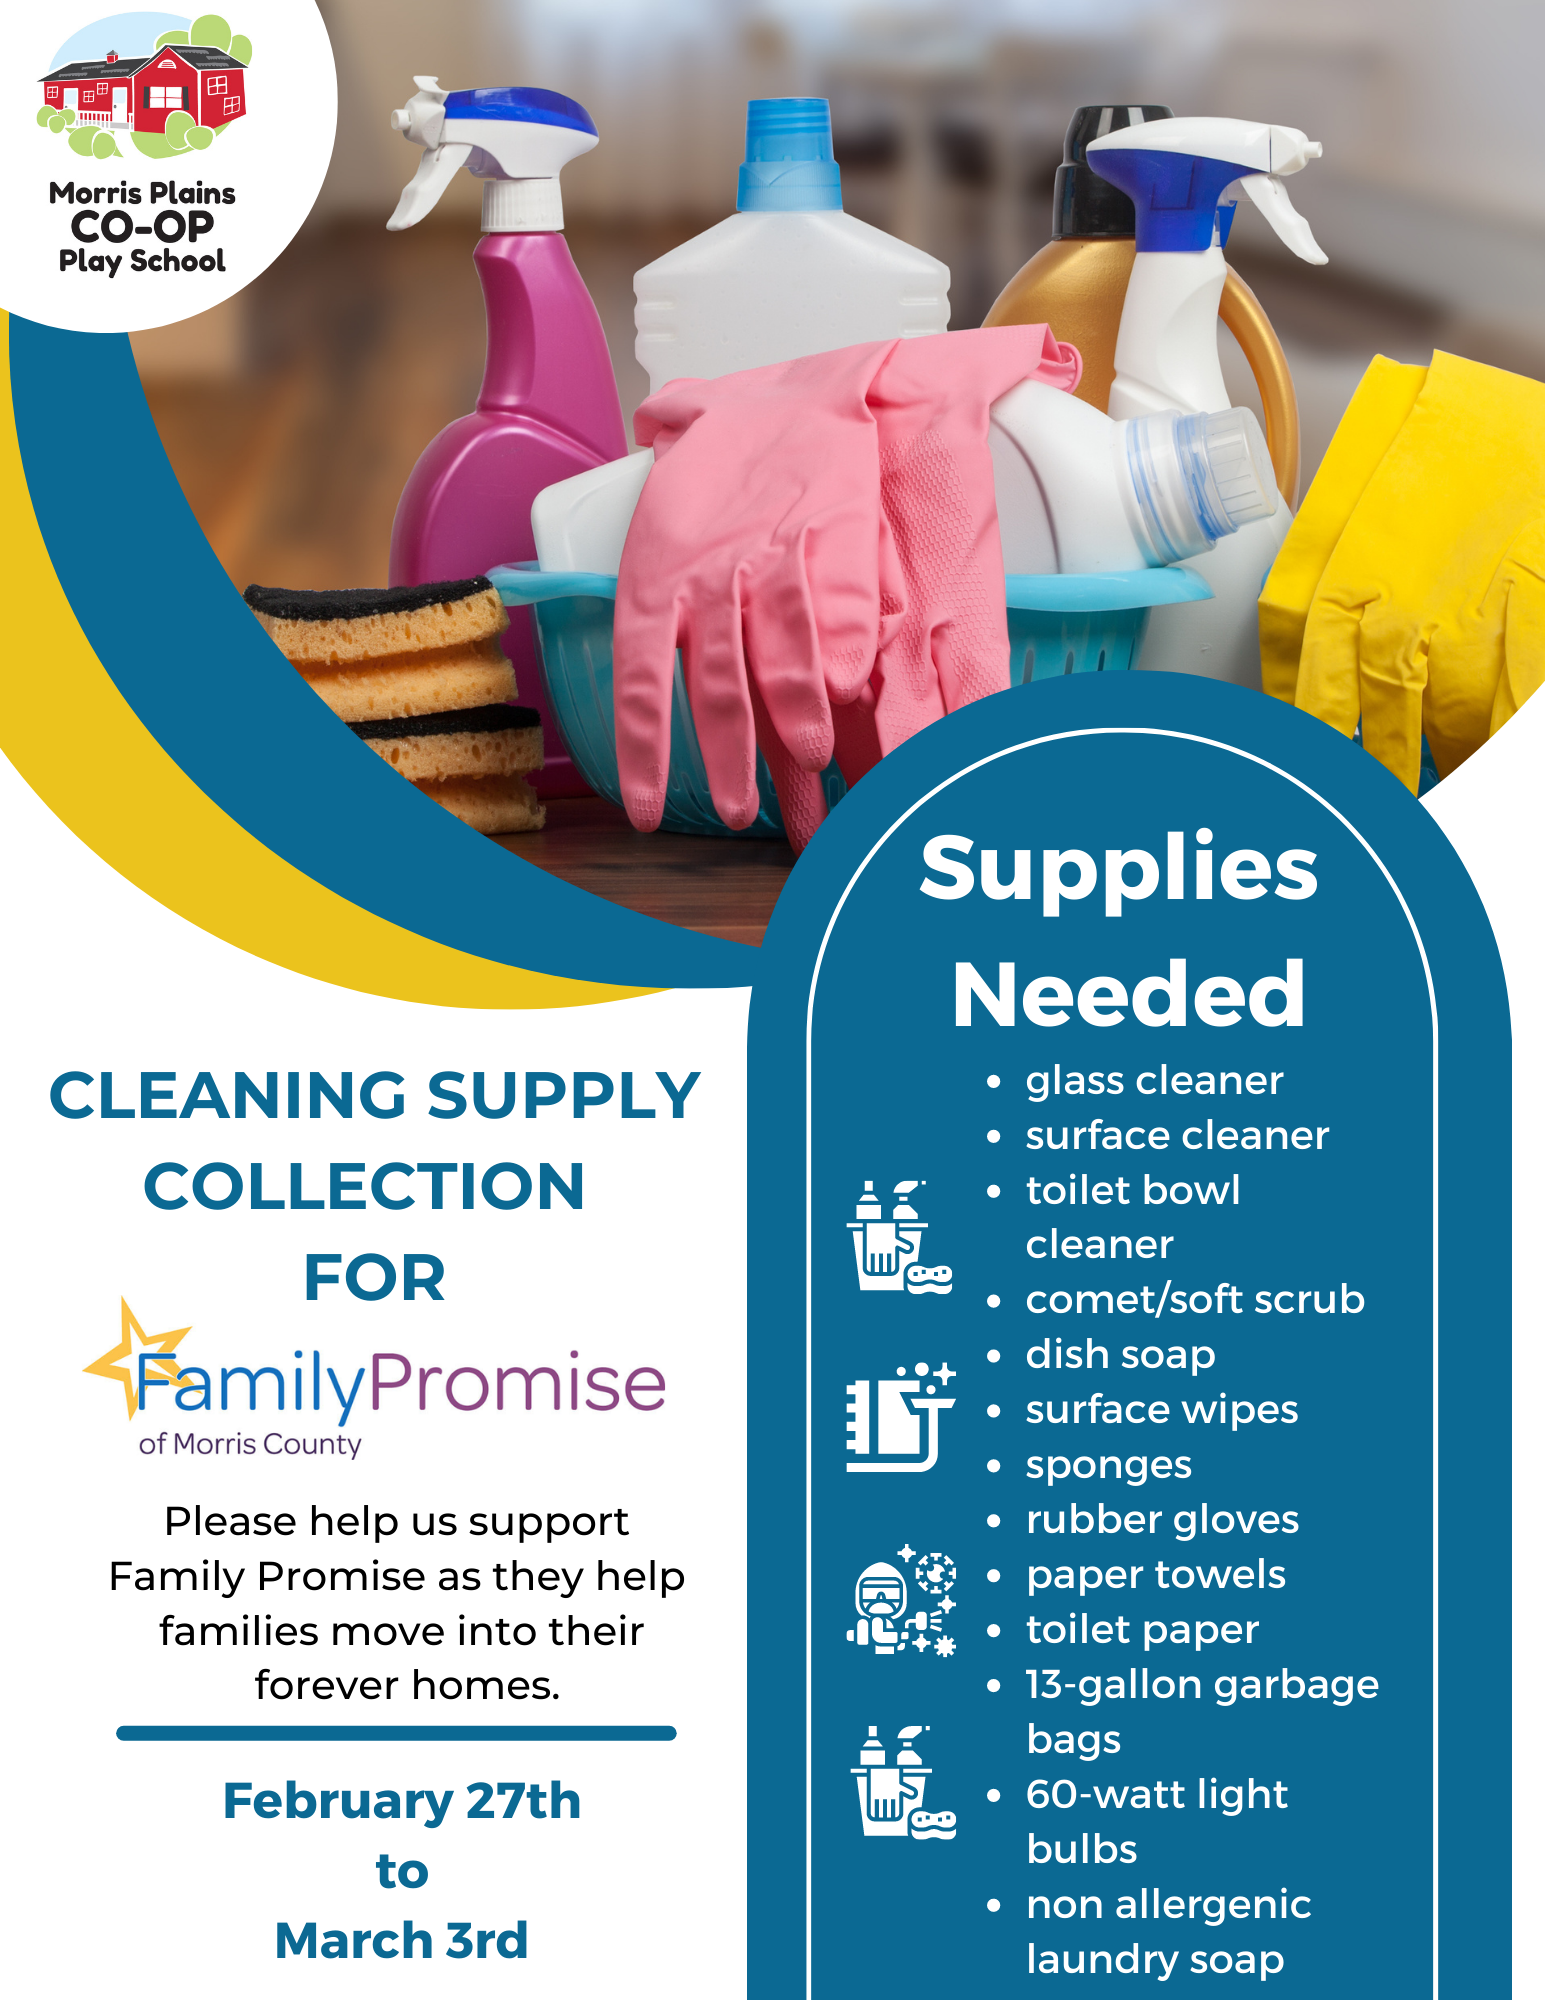 Collection for Family Promise